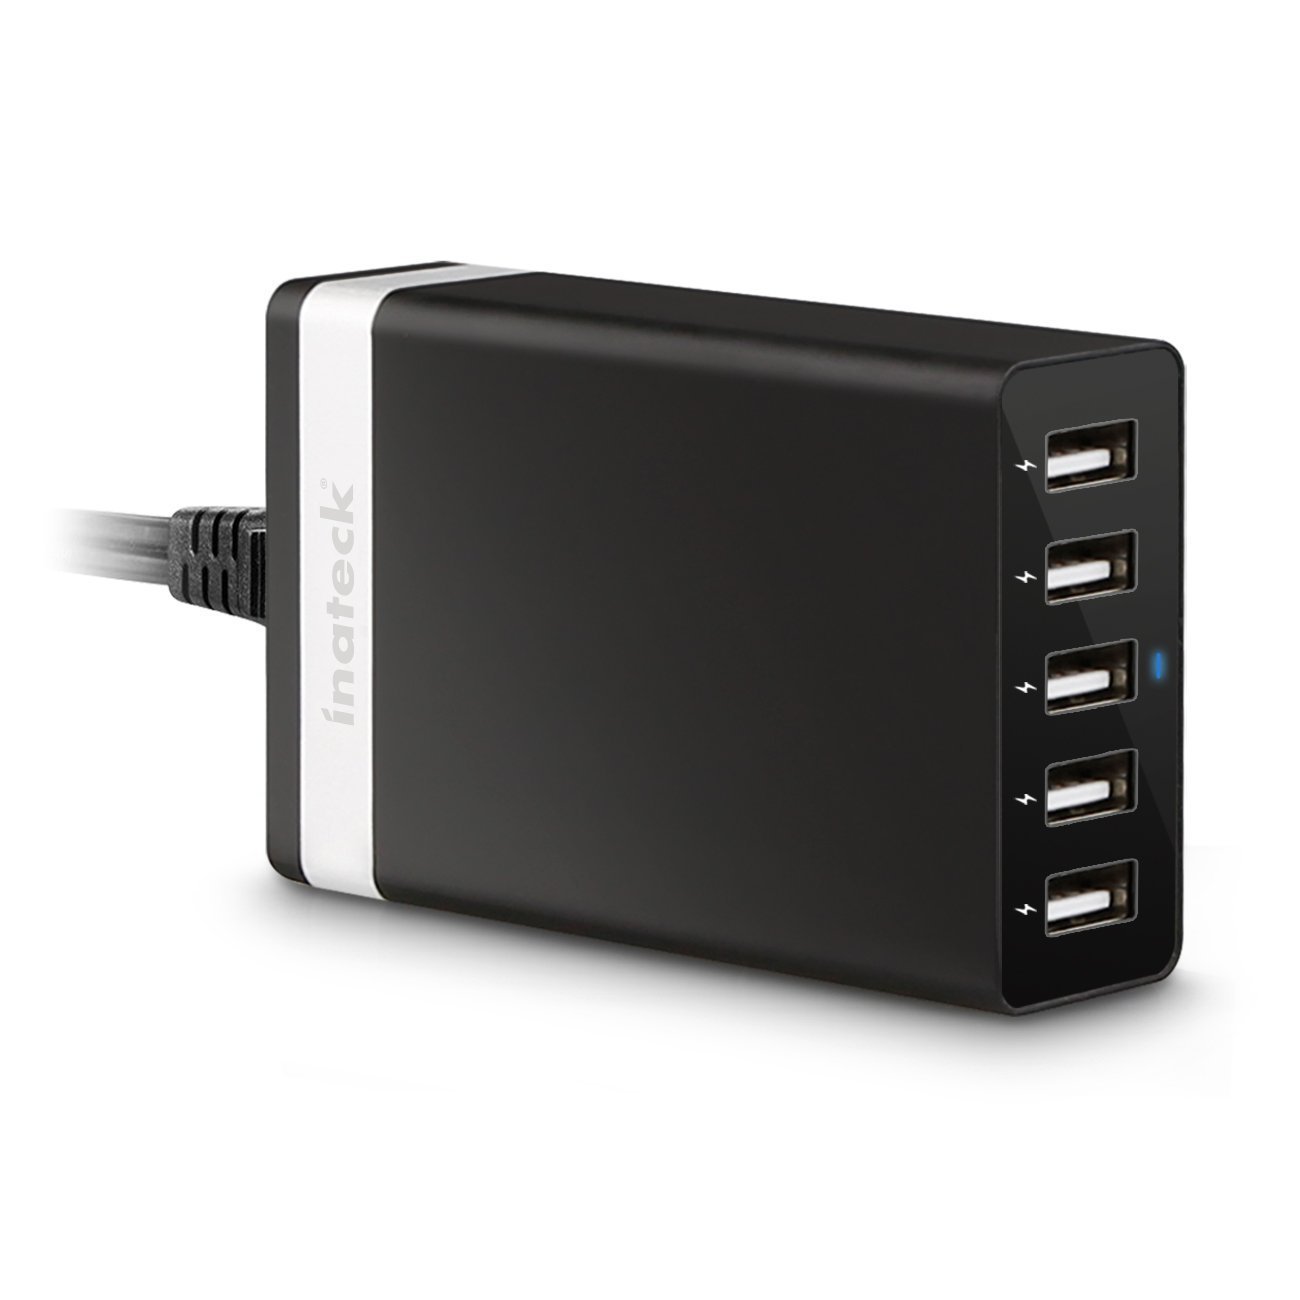 Inateck 40W 5-Port USB charger